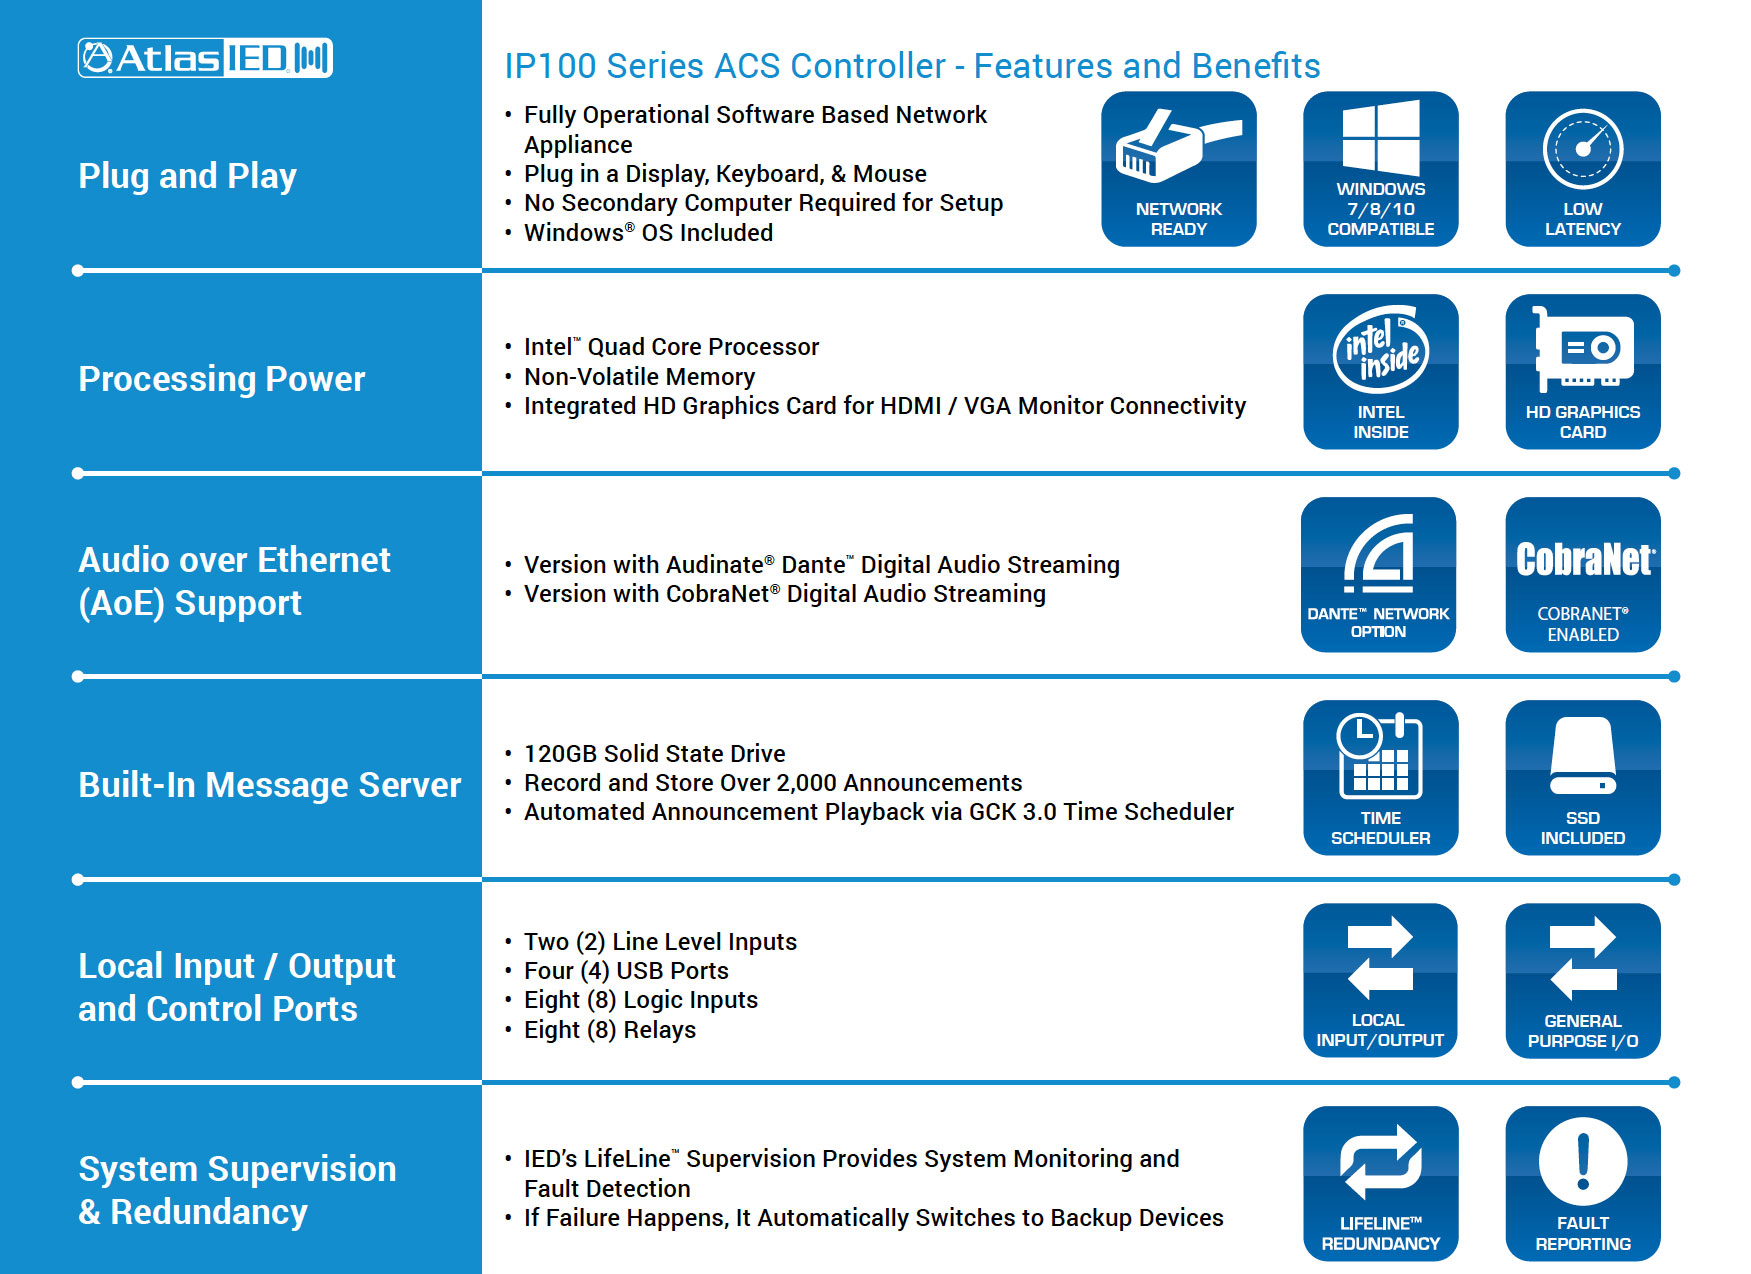 IP100 Series Features and Benefits